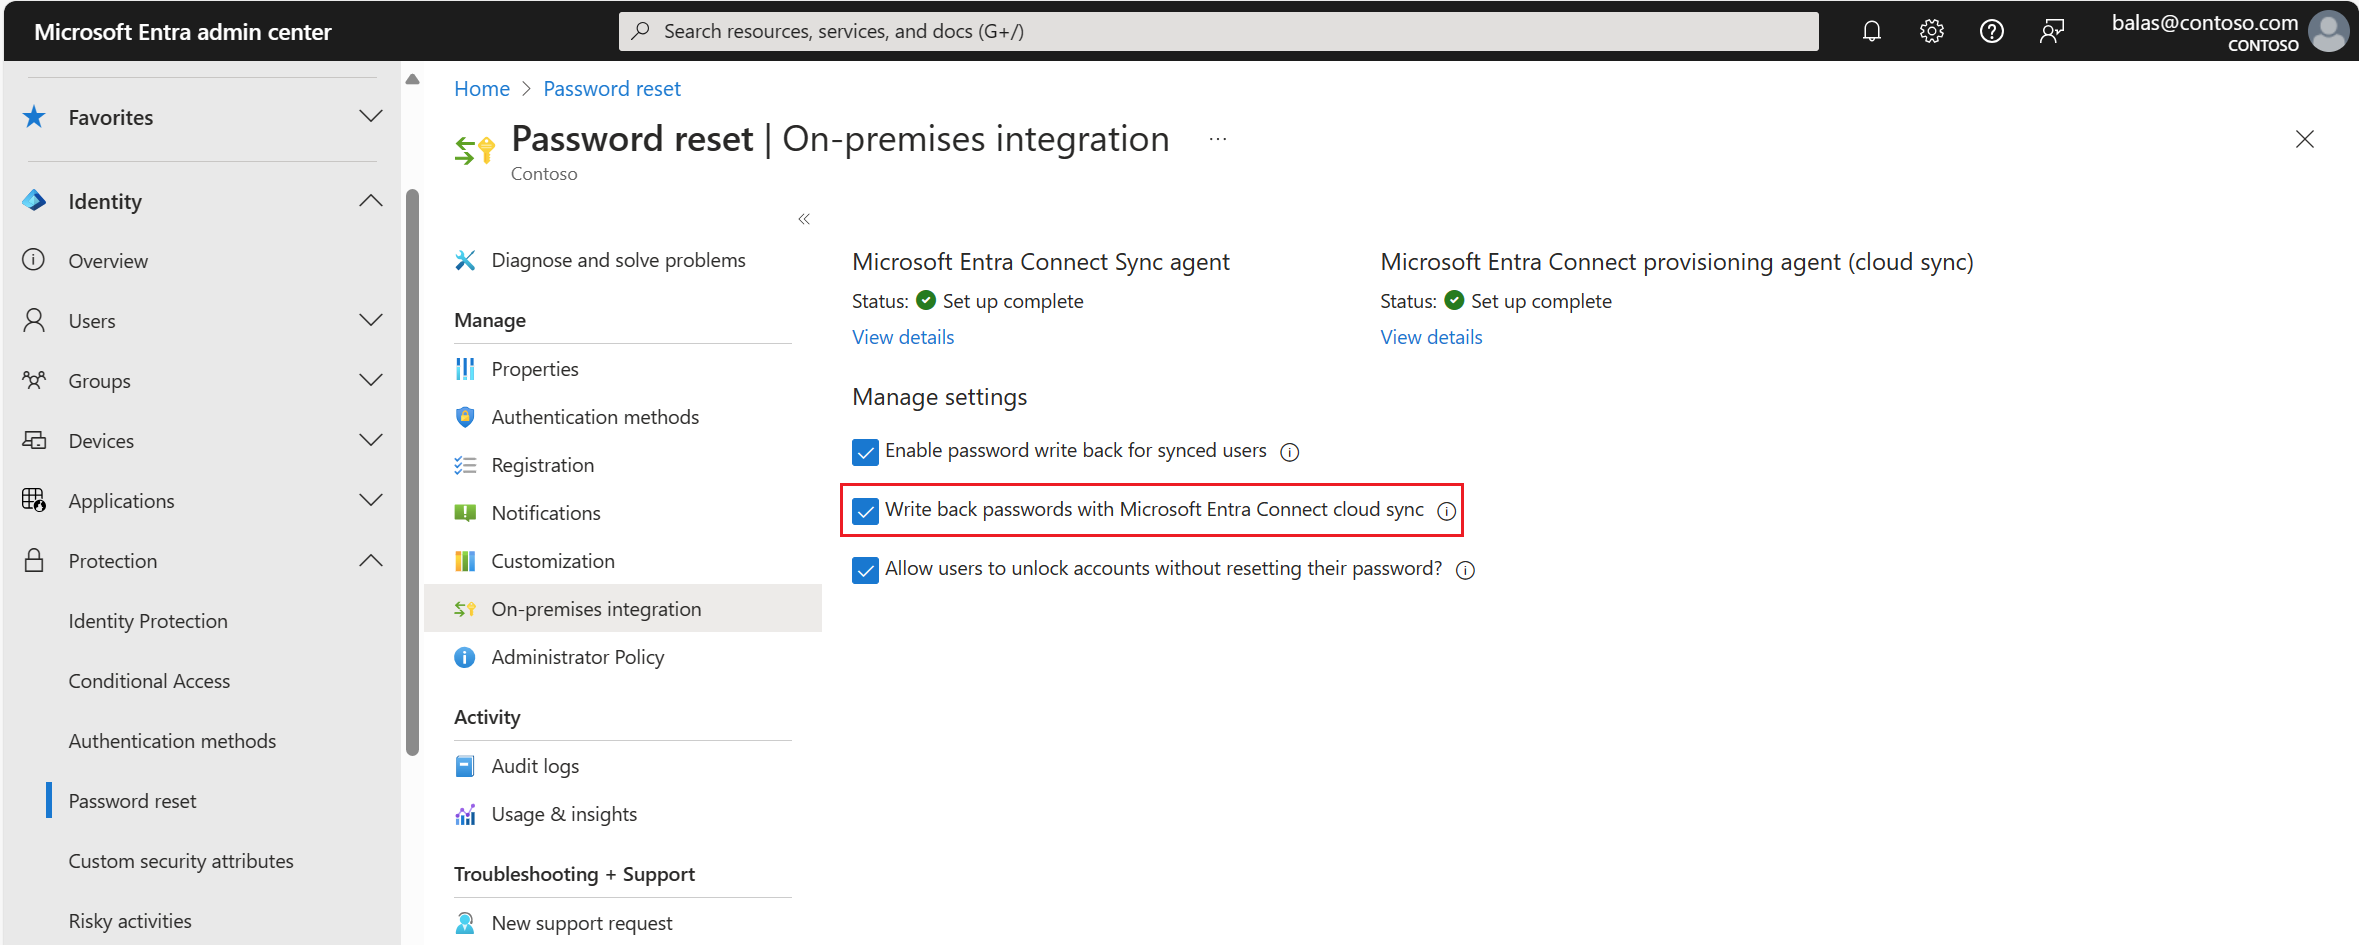 Screenshot of password writeback enabled for Microsoft Entra ID to an on-premises integration.